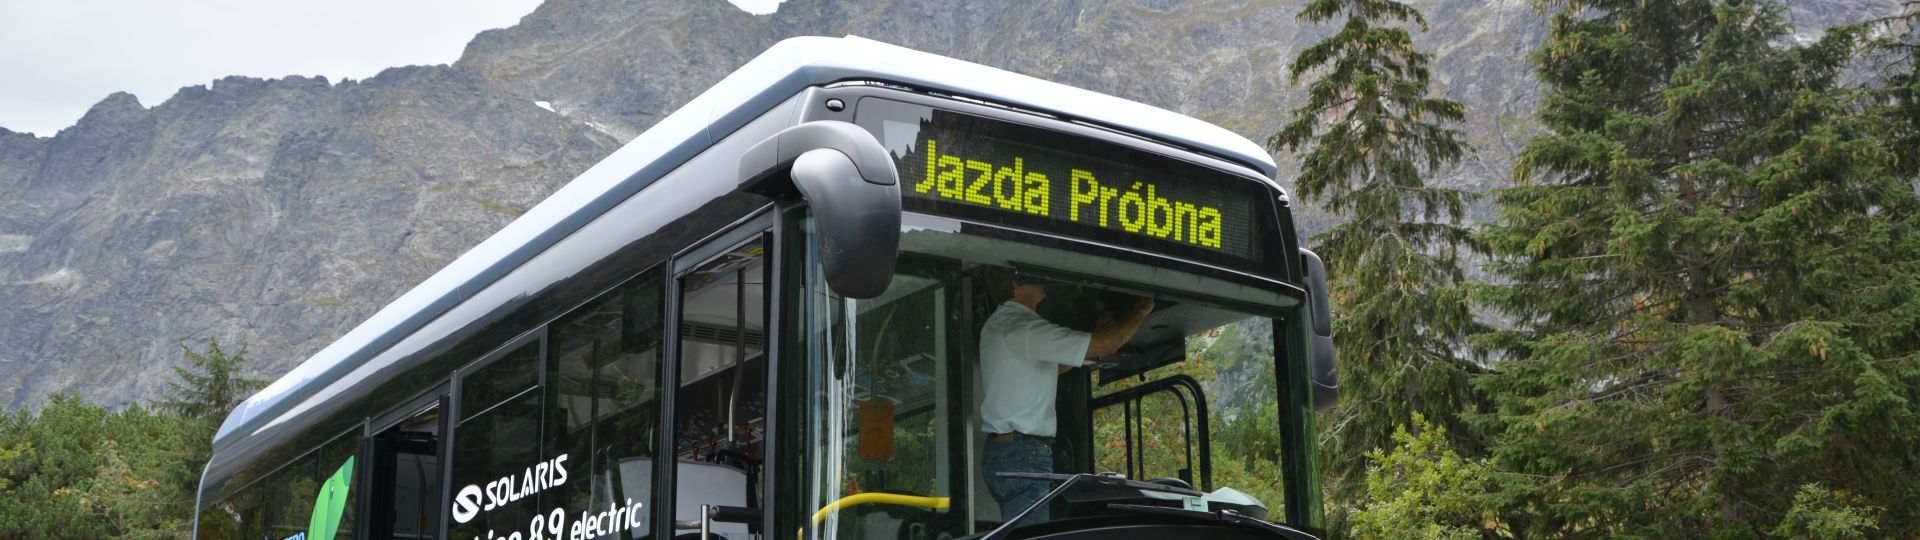 Zakopane in the Tatra Mountains stands for Solaris buses